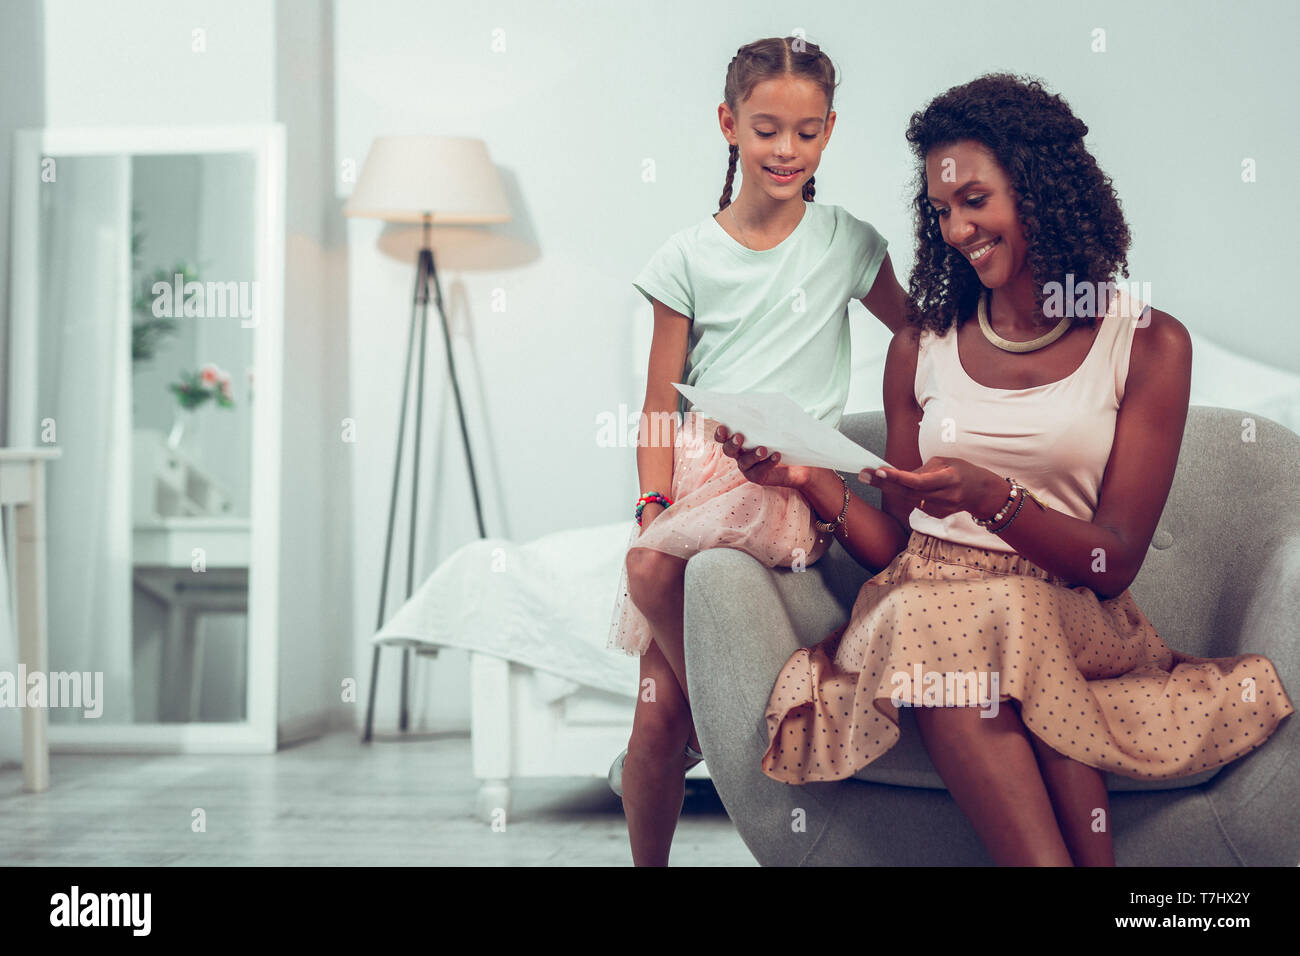 Glowing Afro-American mother looking at the drawing of daughter. Stock Photo